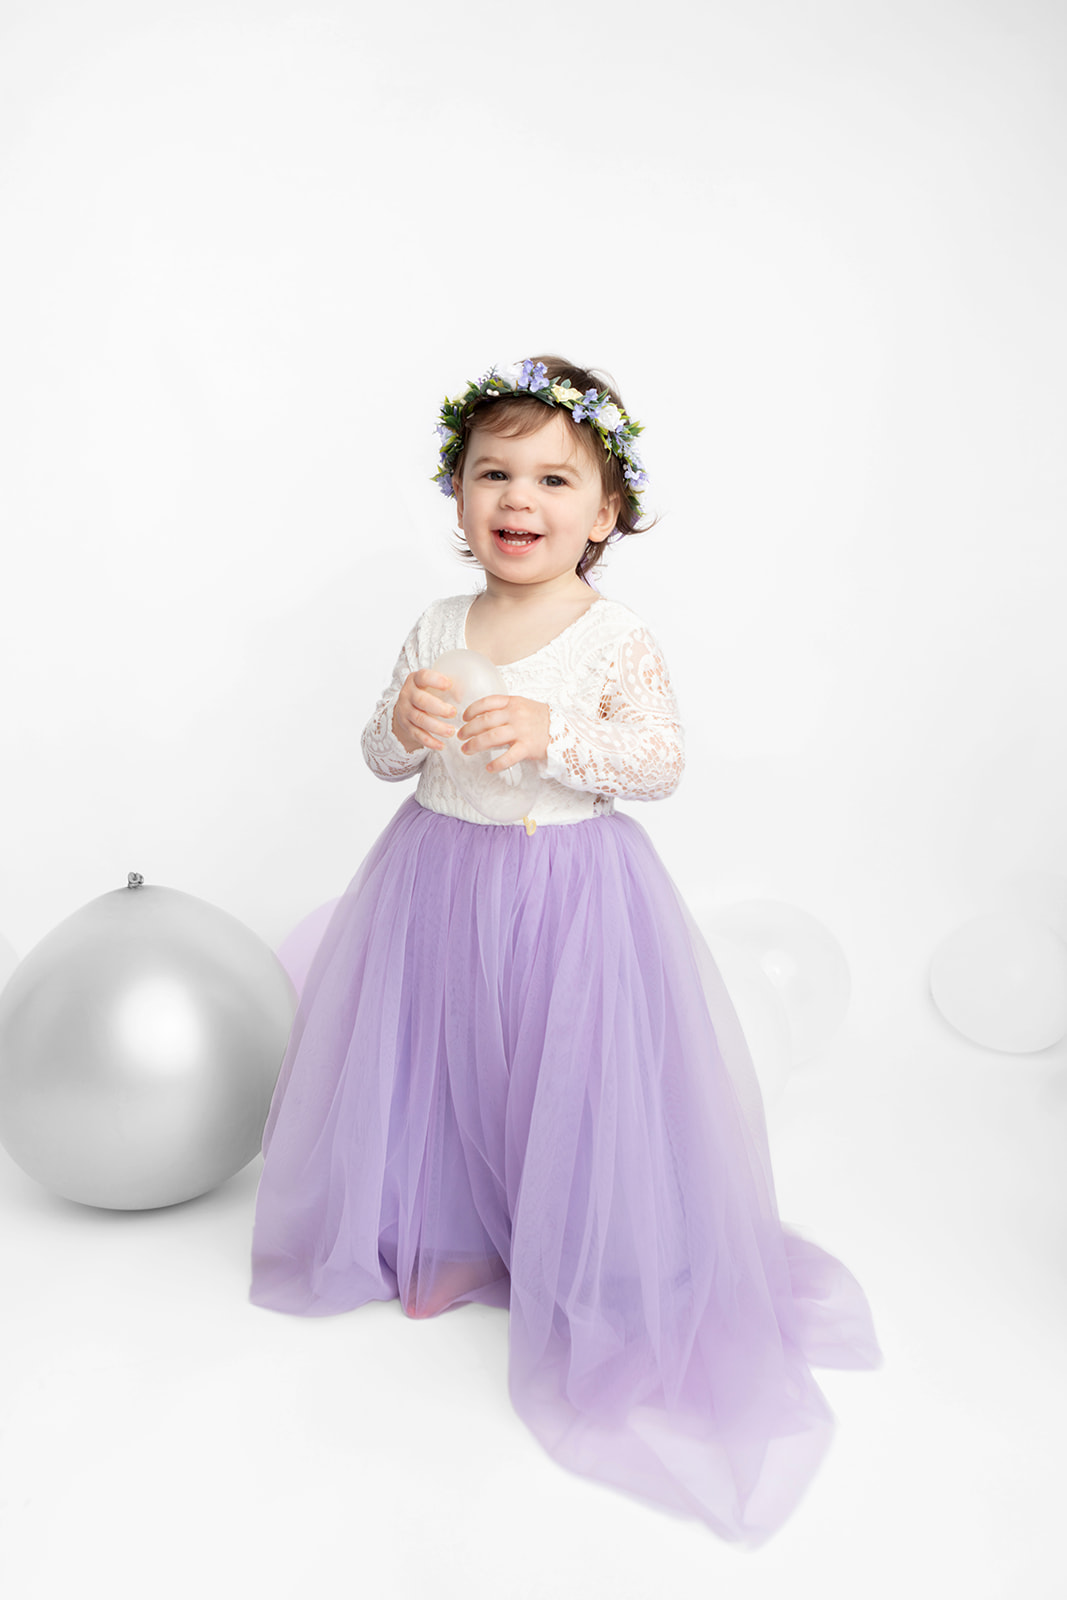 Two year-old Blake holds a small translucent party balloon and an easy smile on her face as she is photographed for her birthday. She wears a purple and white floral crown, and her wispy toddler hair peeks out from underneath it. Her cream lace and purple tulle fancy dress drapes on the floor of Karen Kahn's Greenwich, CT photography studio.